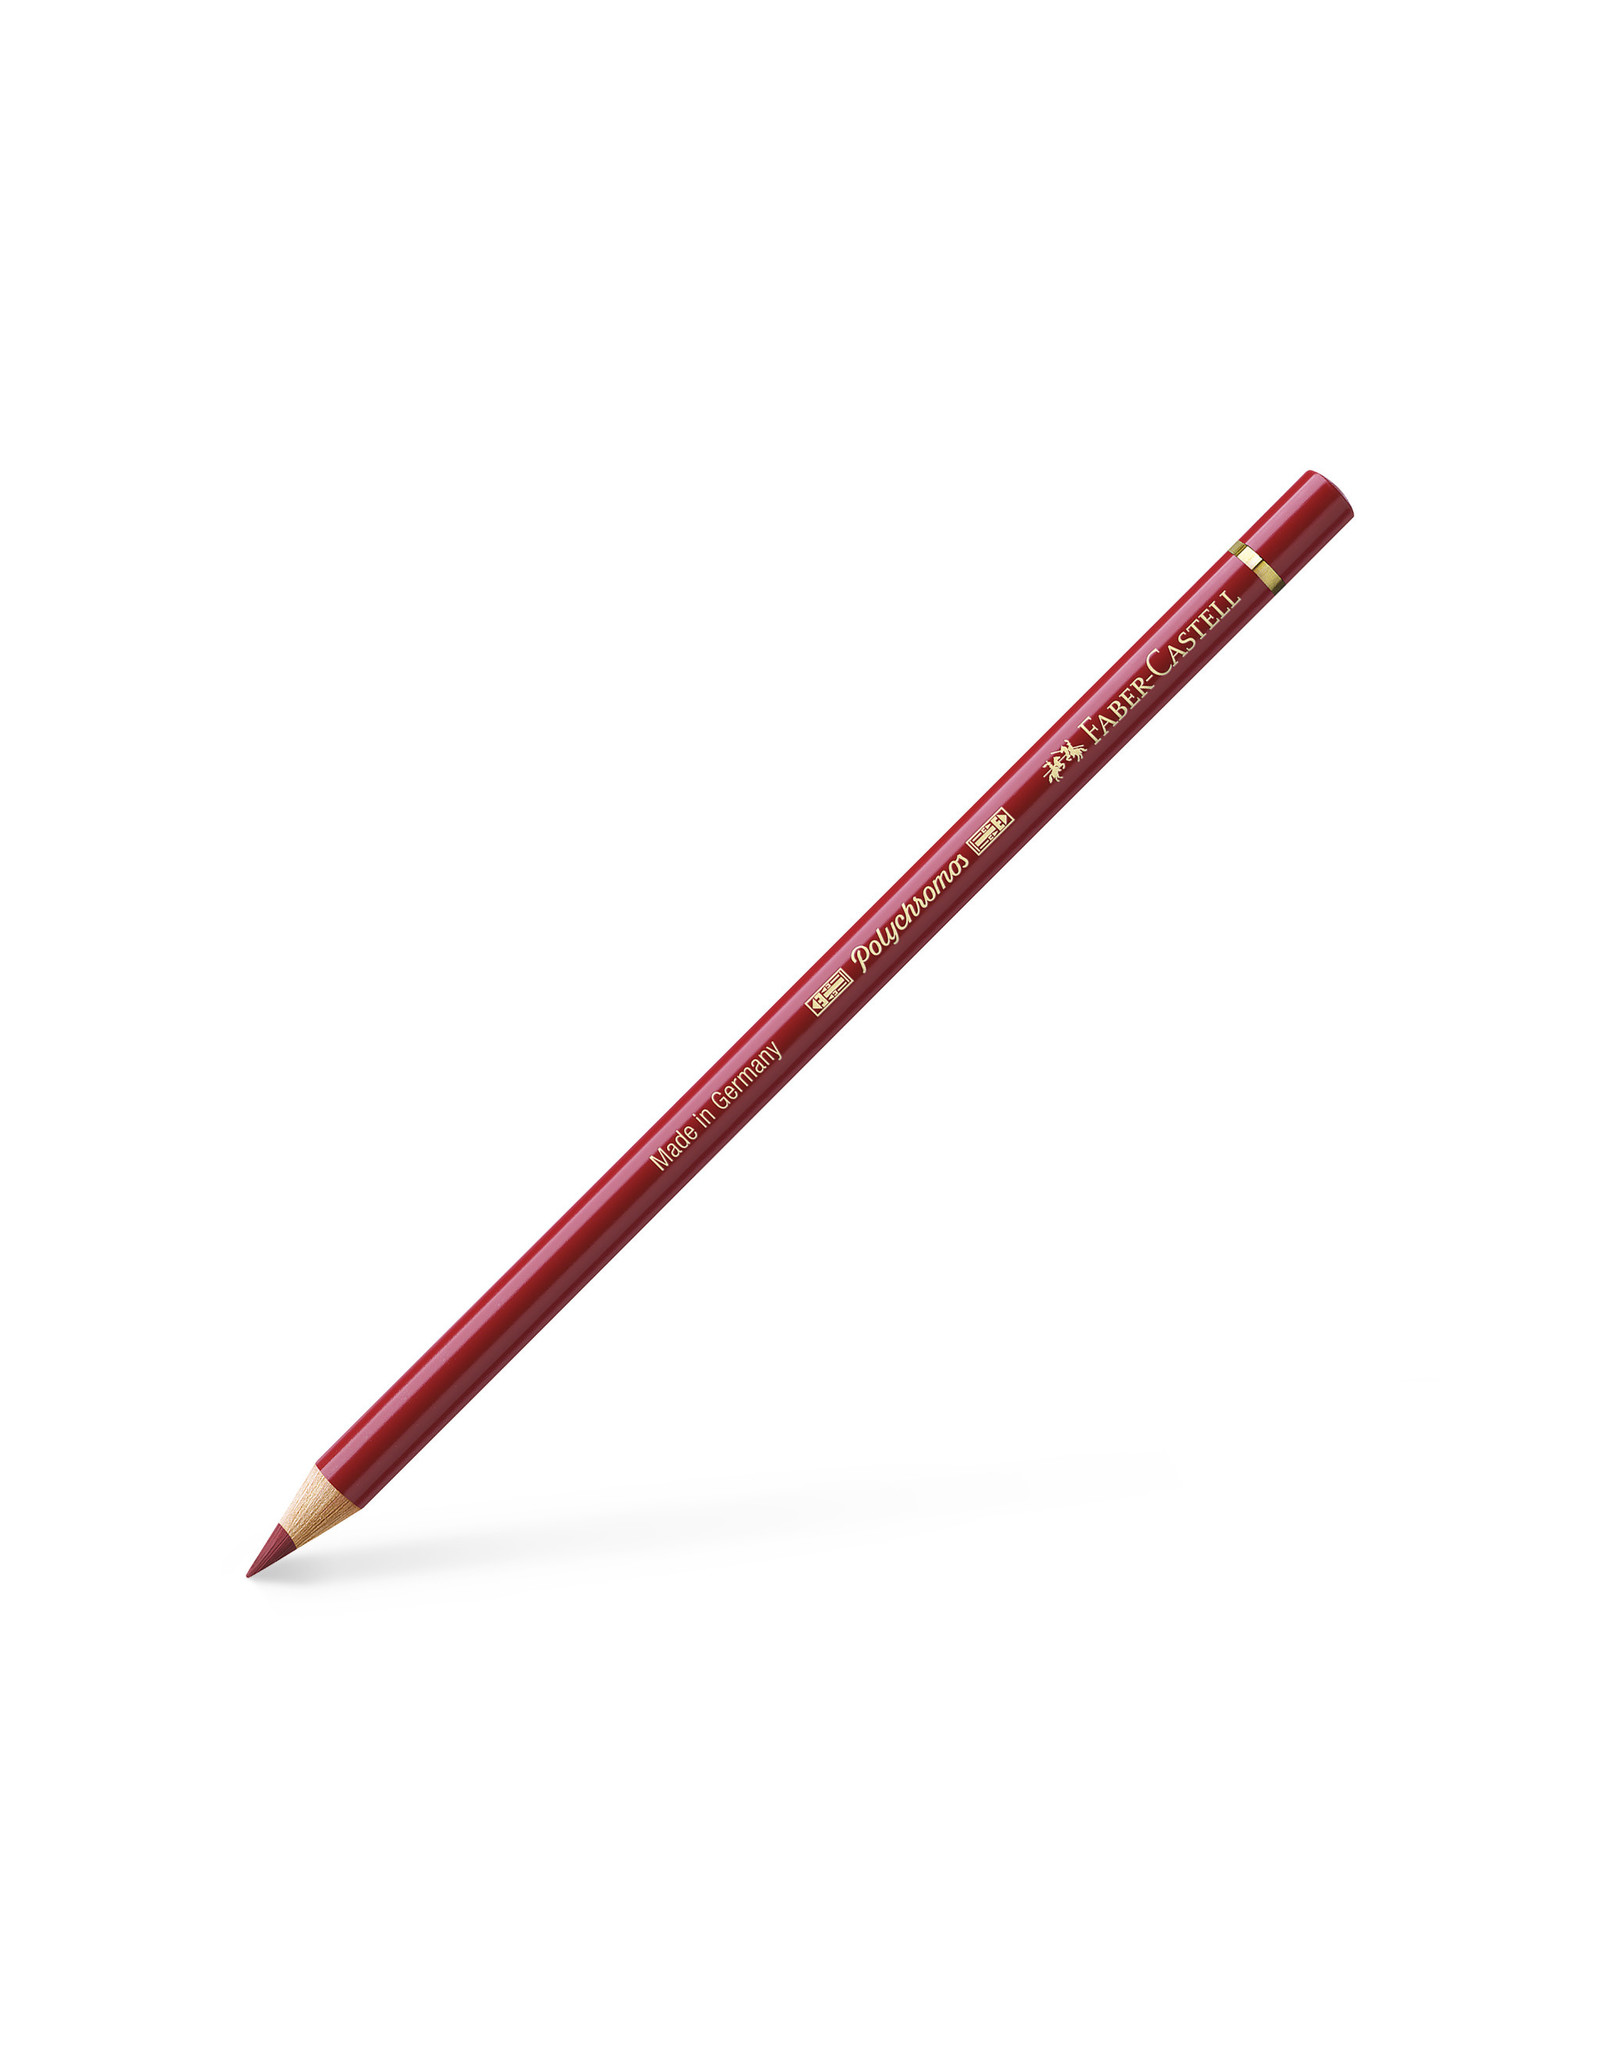 FABER-CASTELL Faber-Castell Polychromos, Middle Cadmium Red # 217